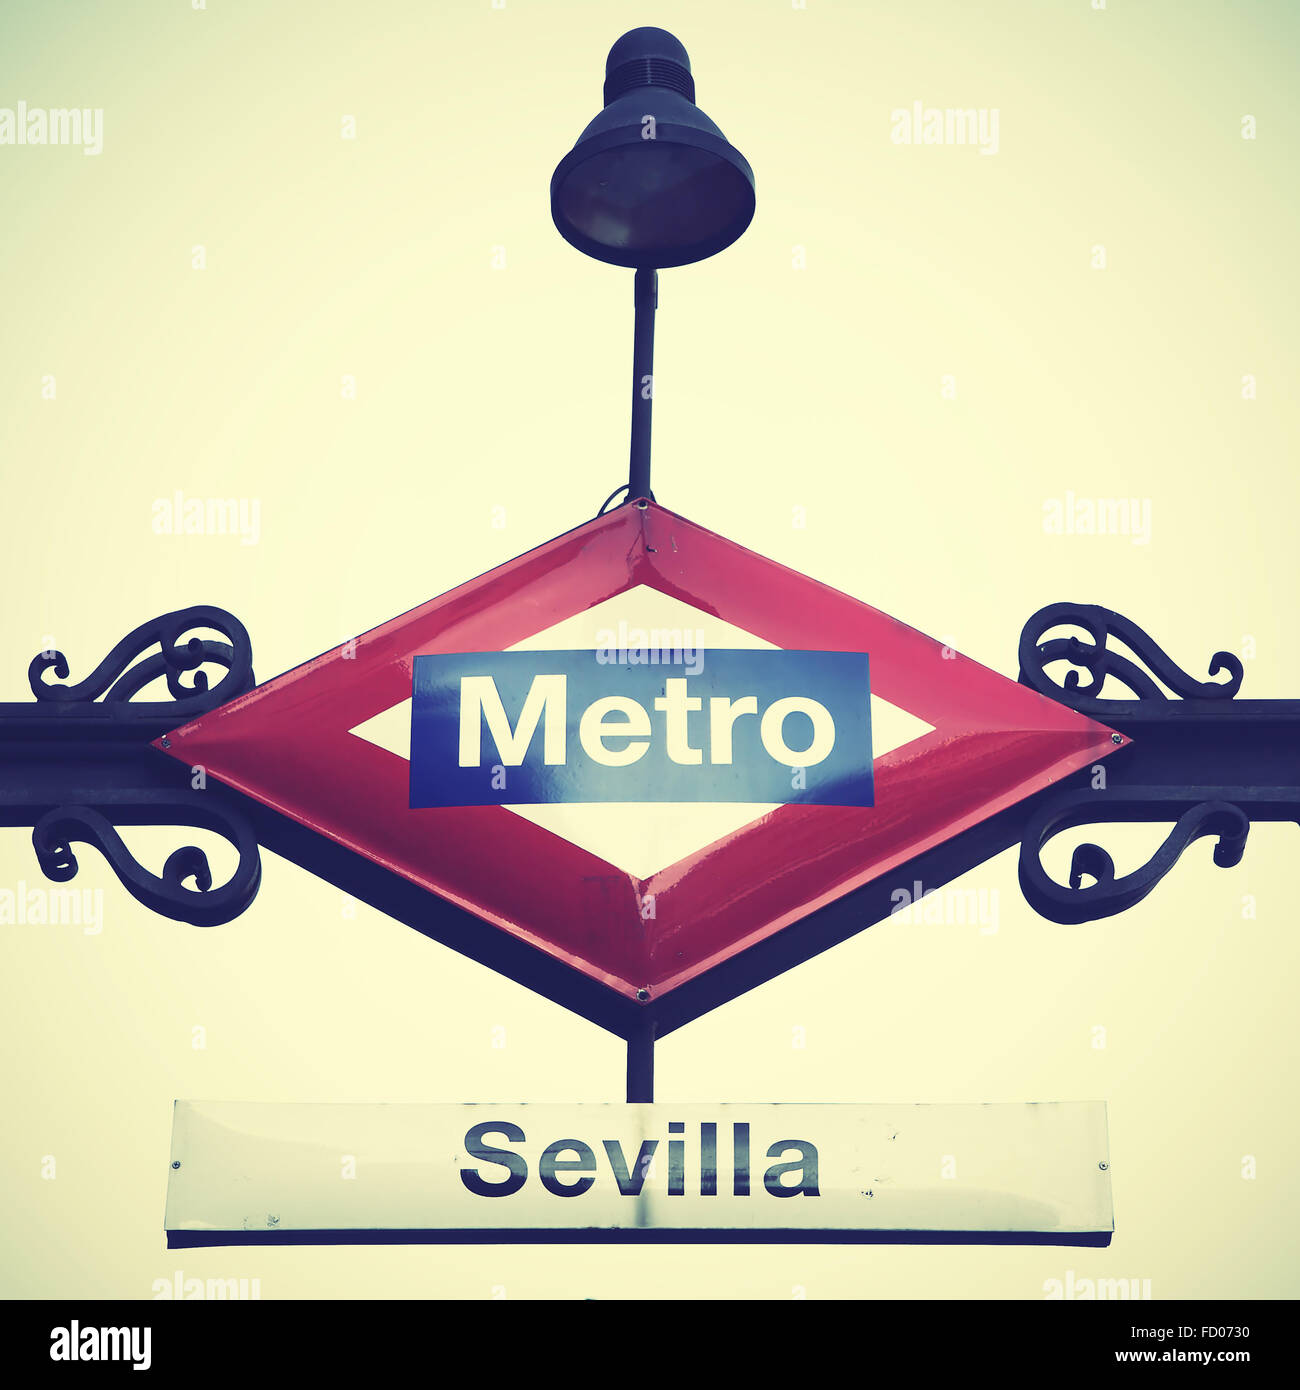 Metro sign in Madrid, Seville station. Vintage style filtred image Stock Photo